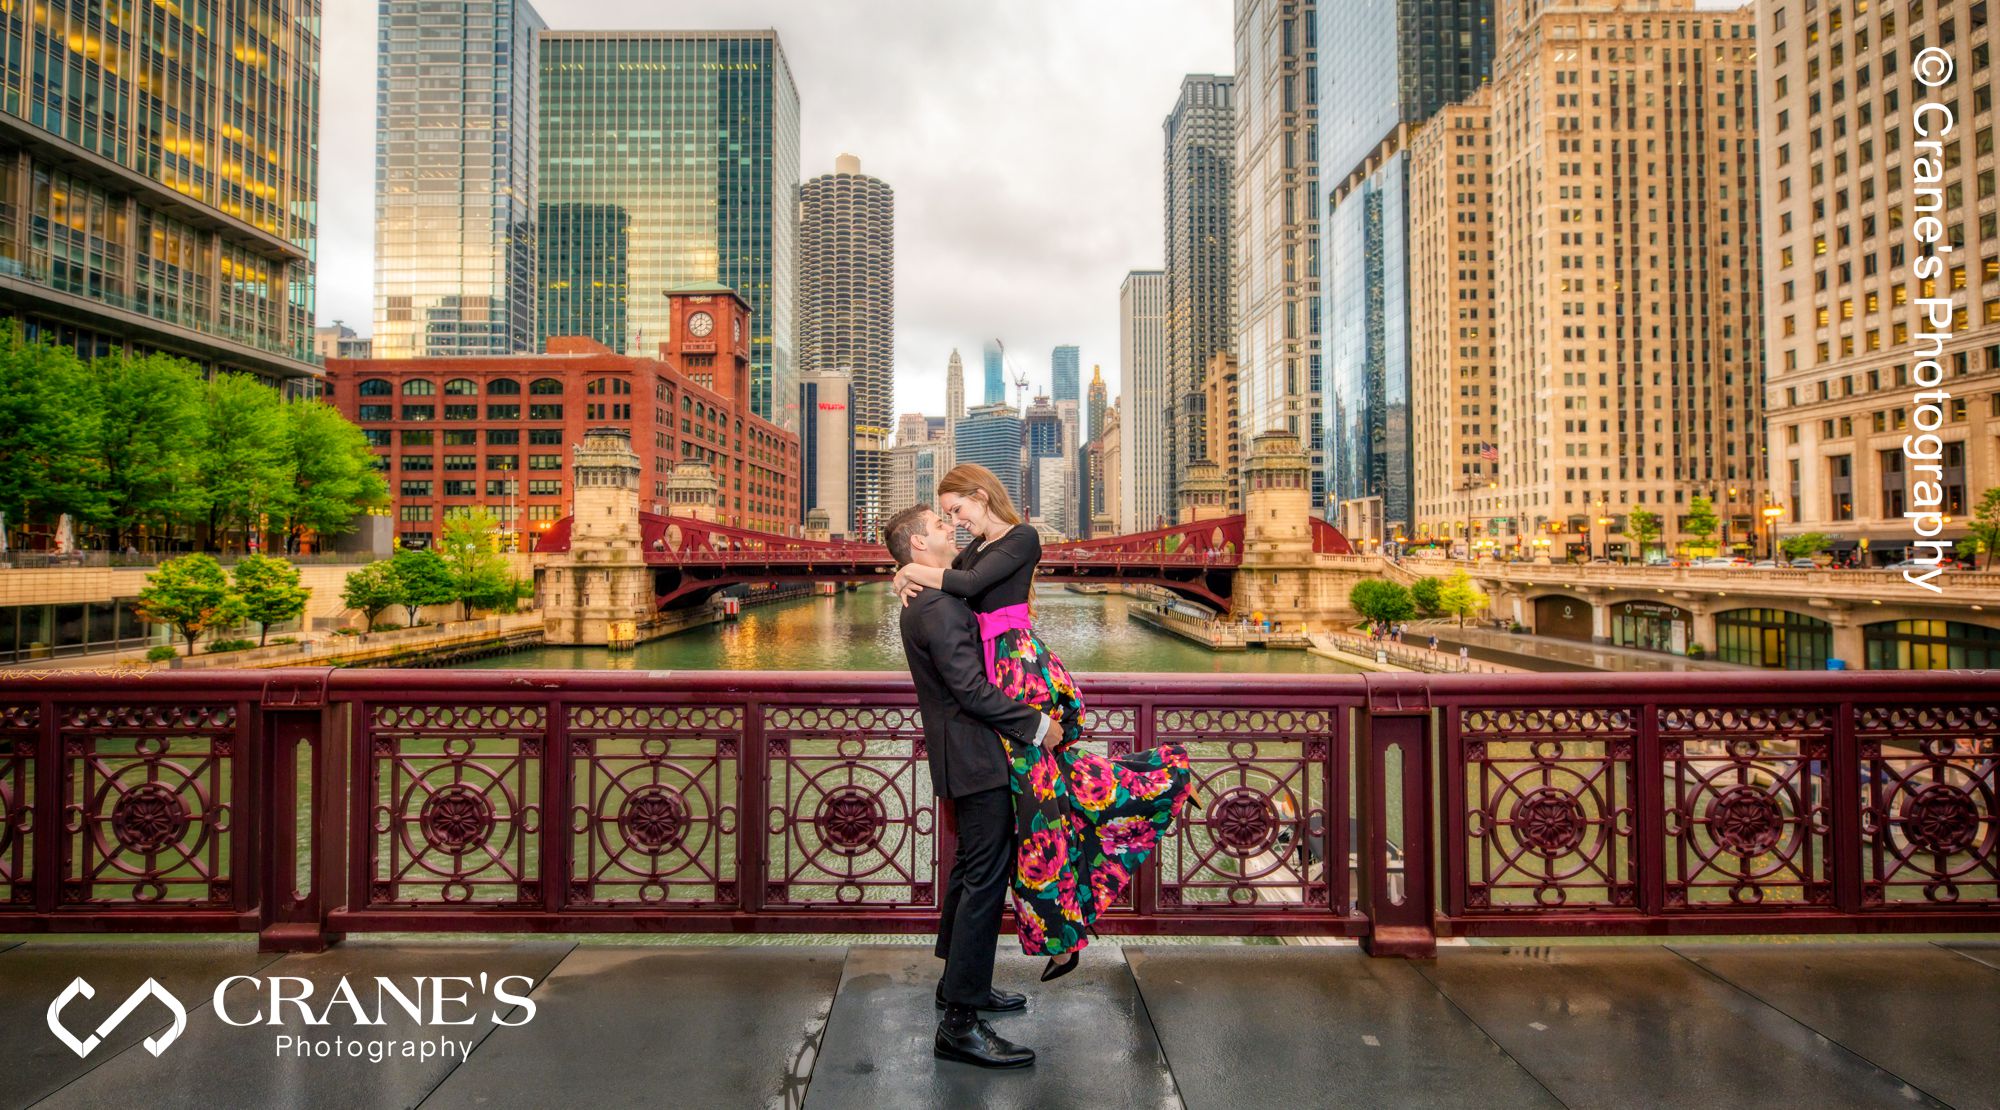 Stunning engagement photo taken on bridge with the Chicago skyline in the background.